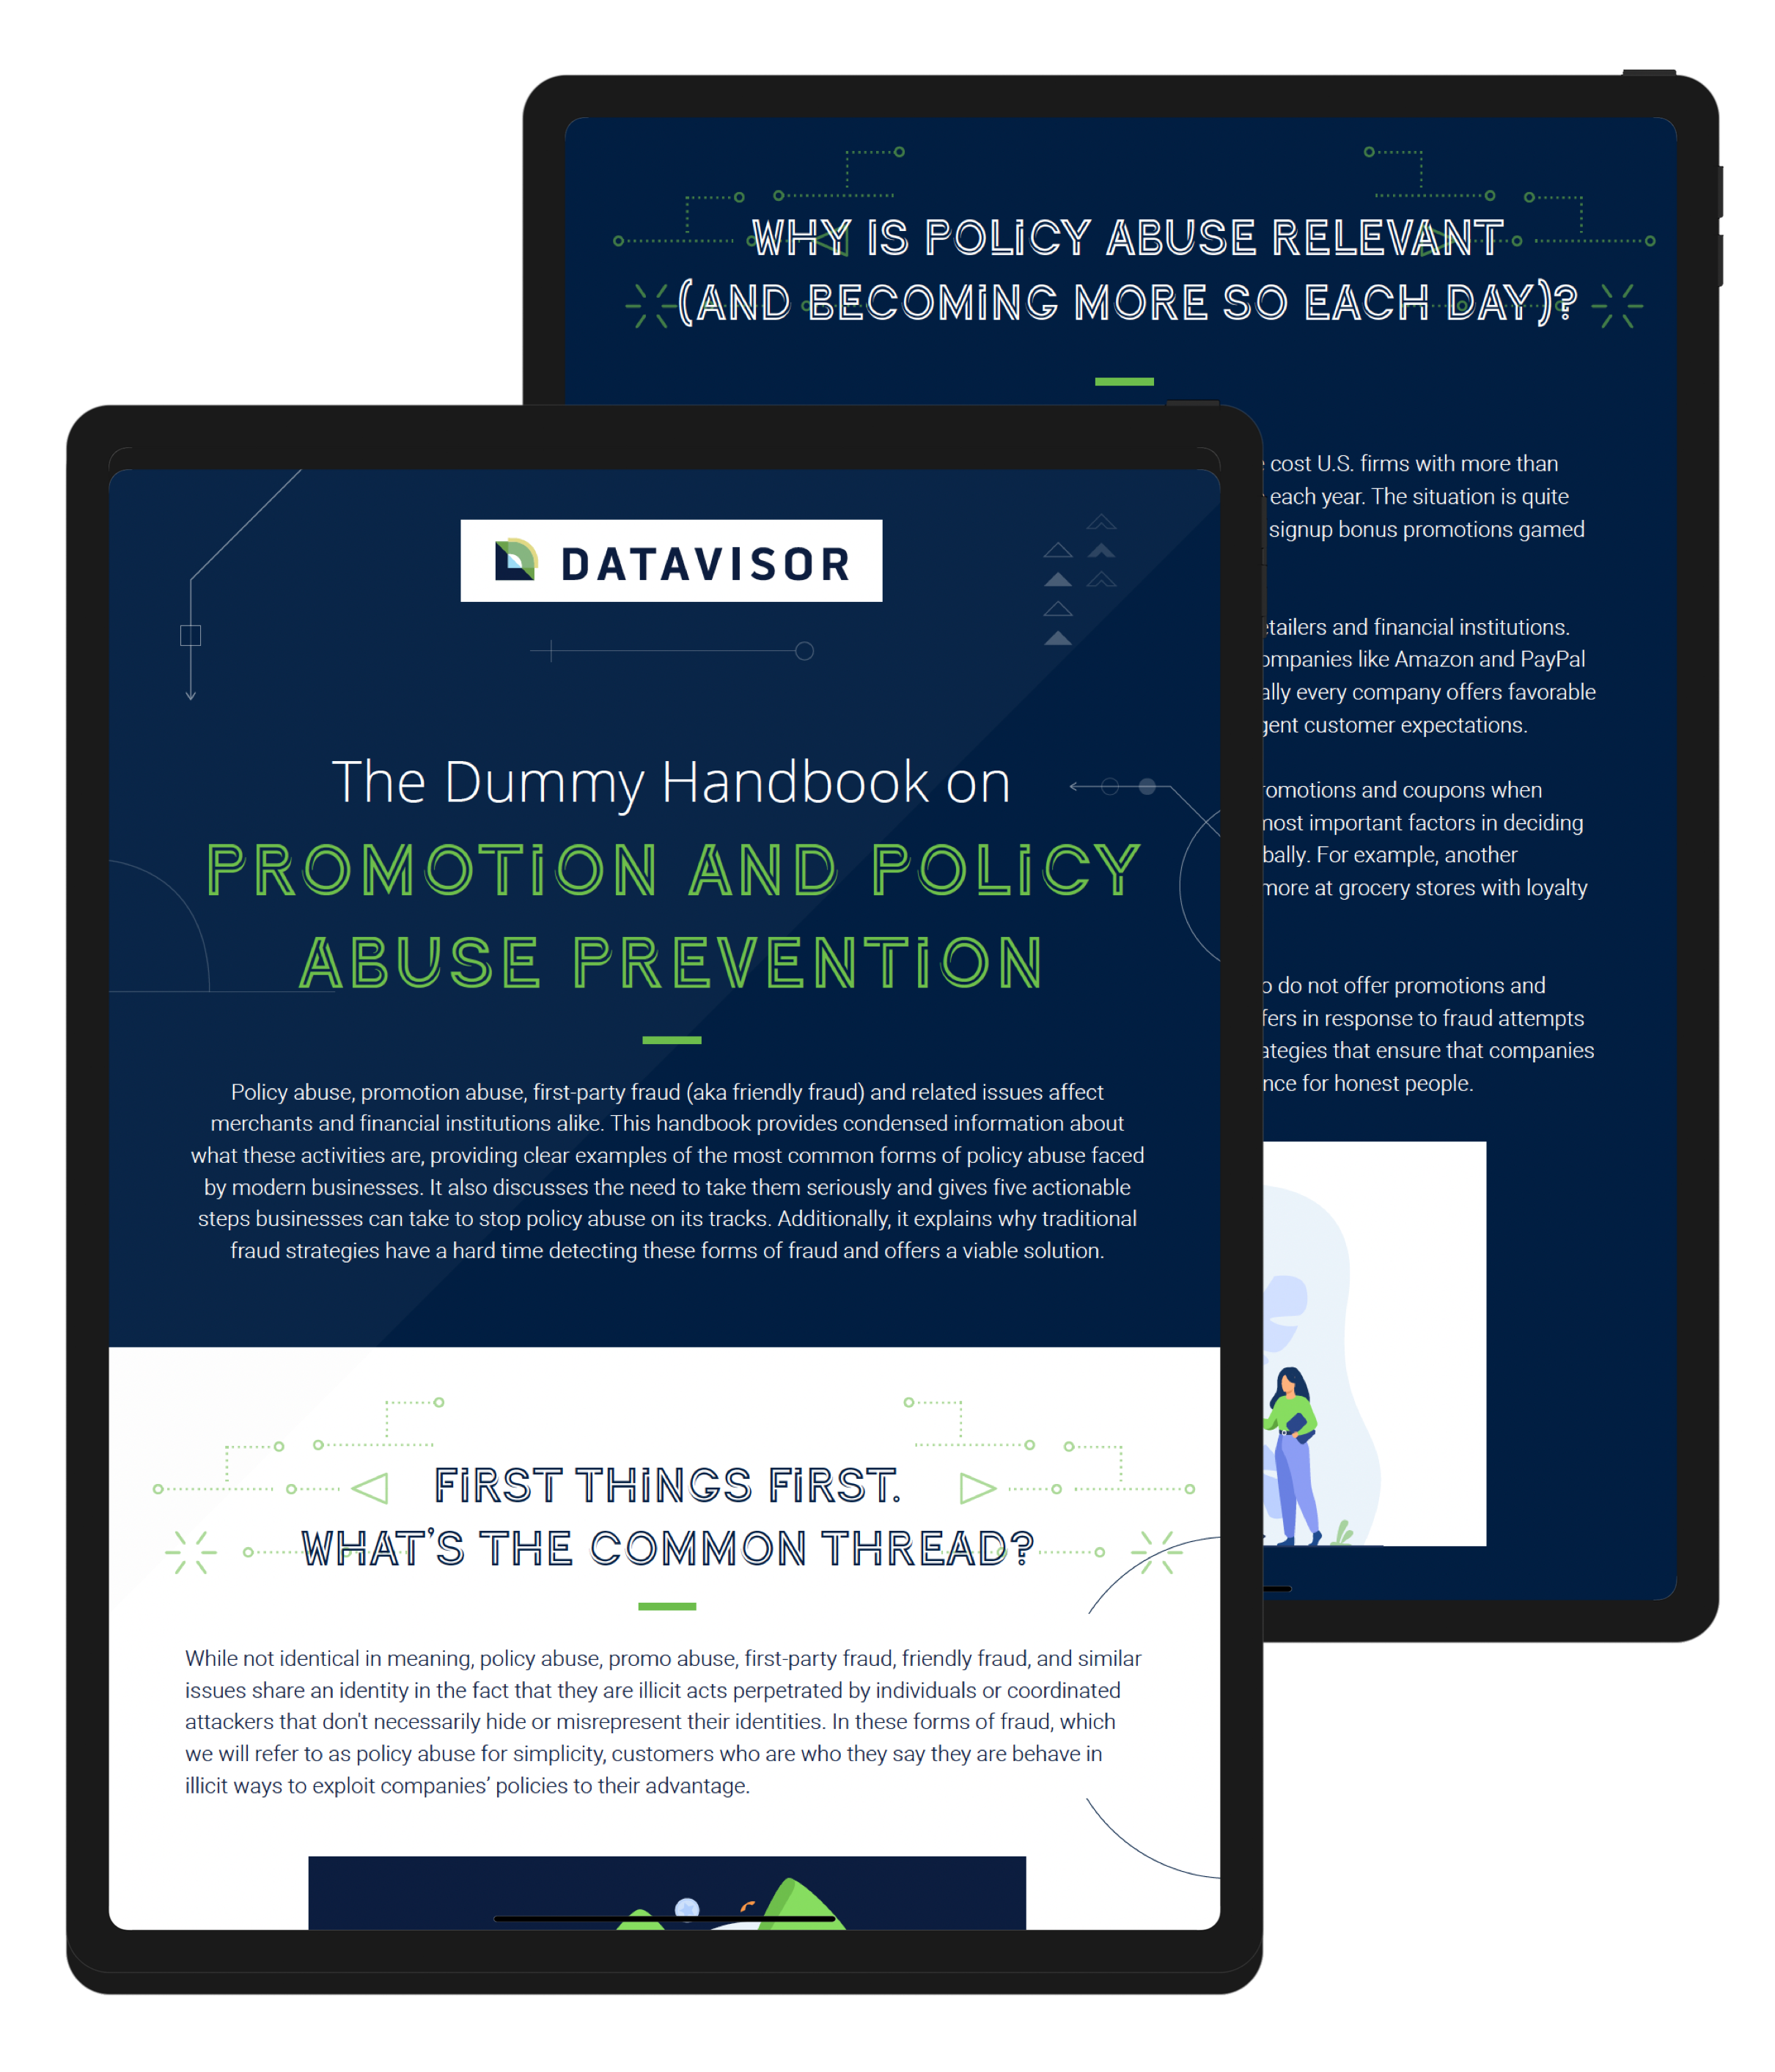 The Dummy Handbook on Promo and Policy Abuse Prevention for Financial Services